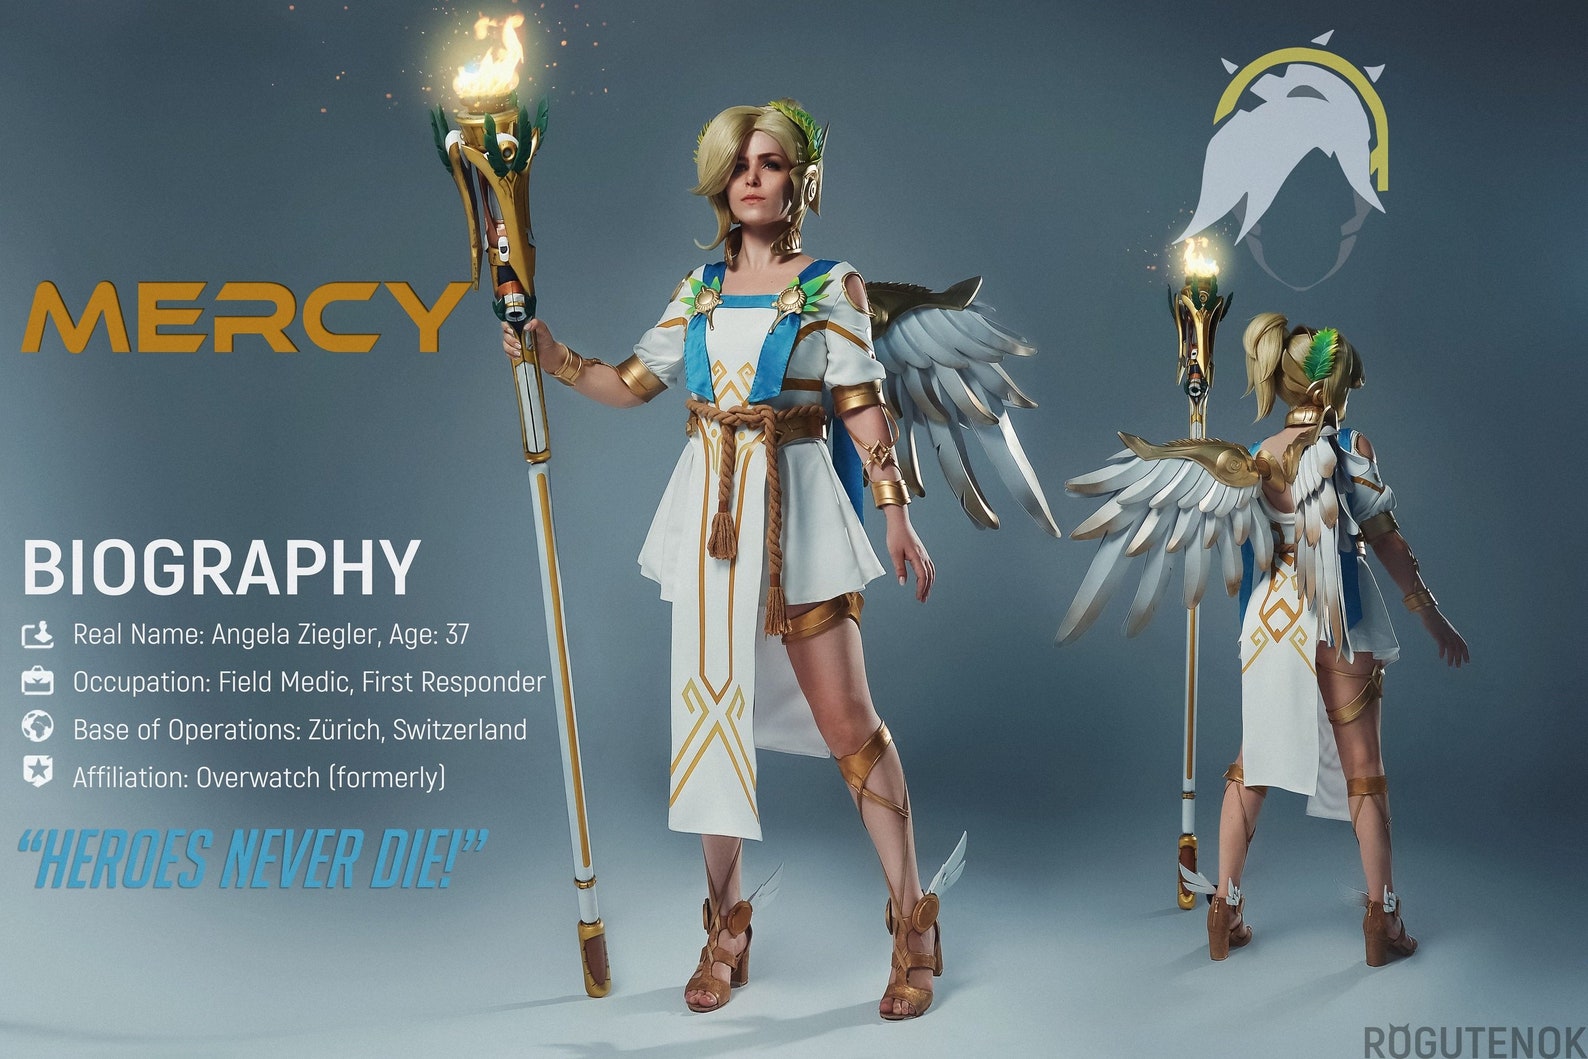 Mercy Winged Victory costume